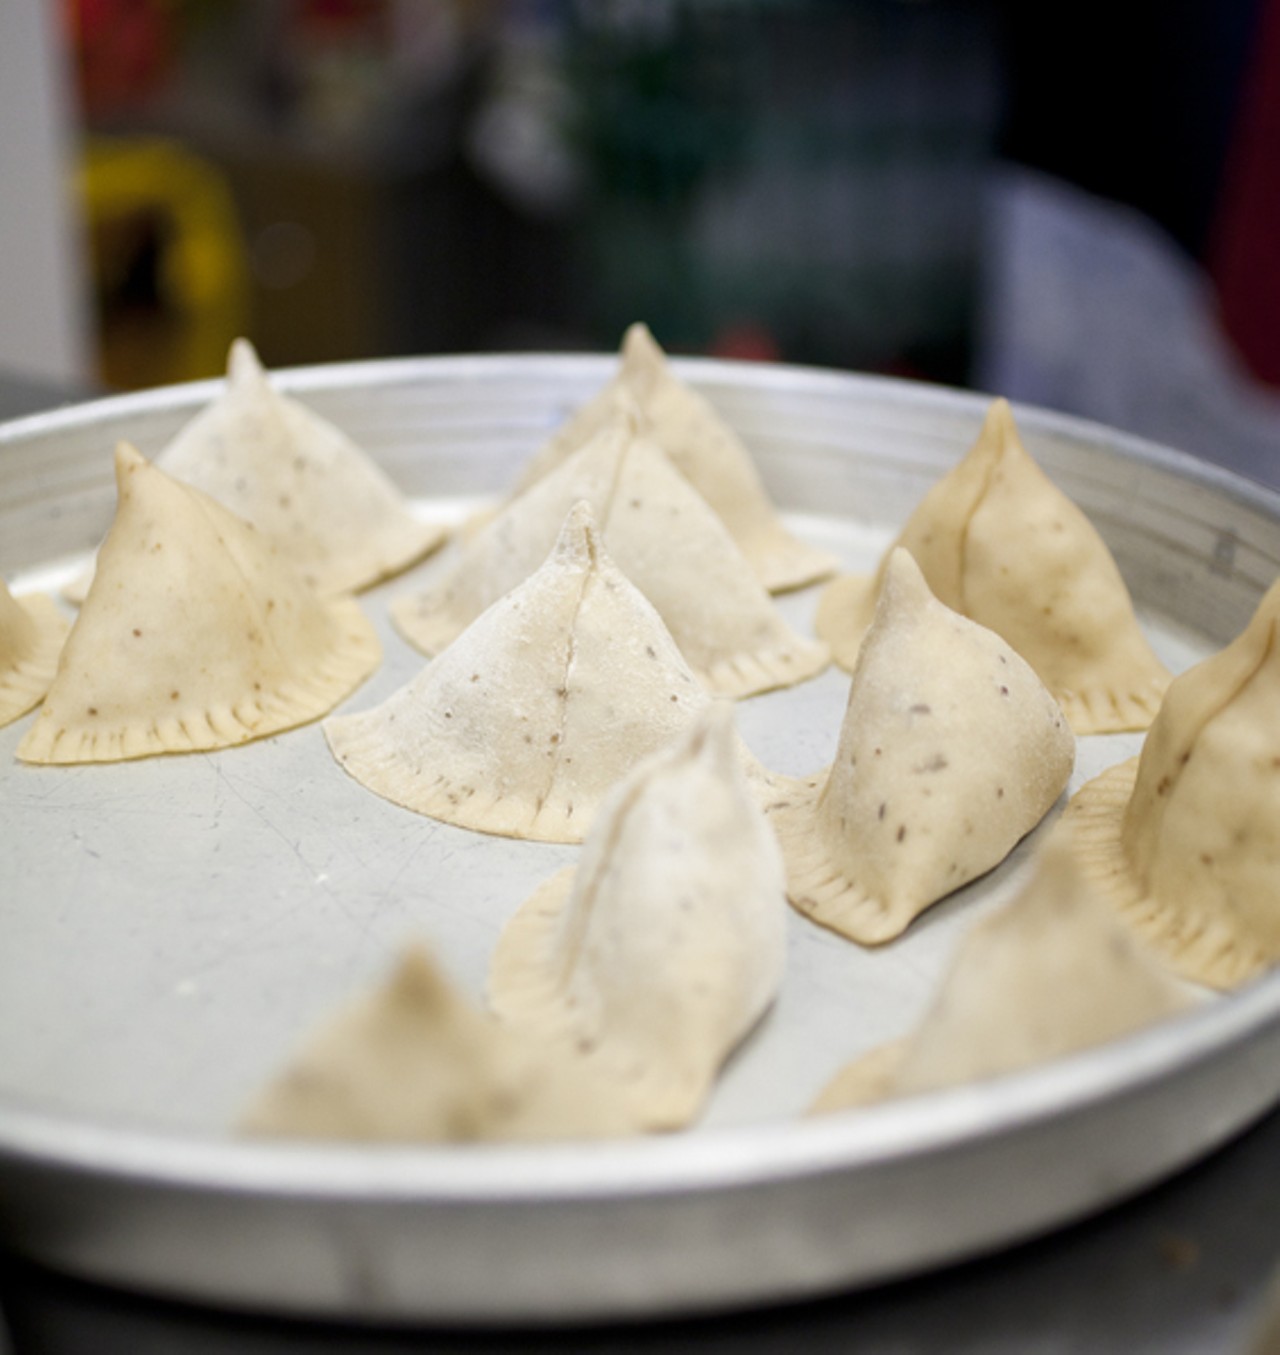 Samosas before being fried.